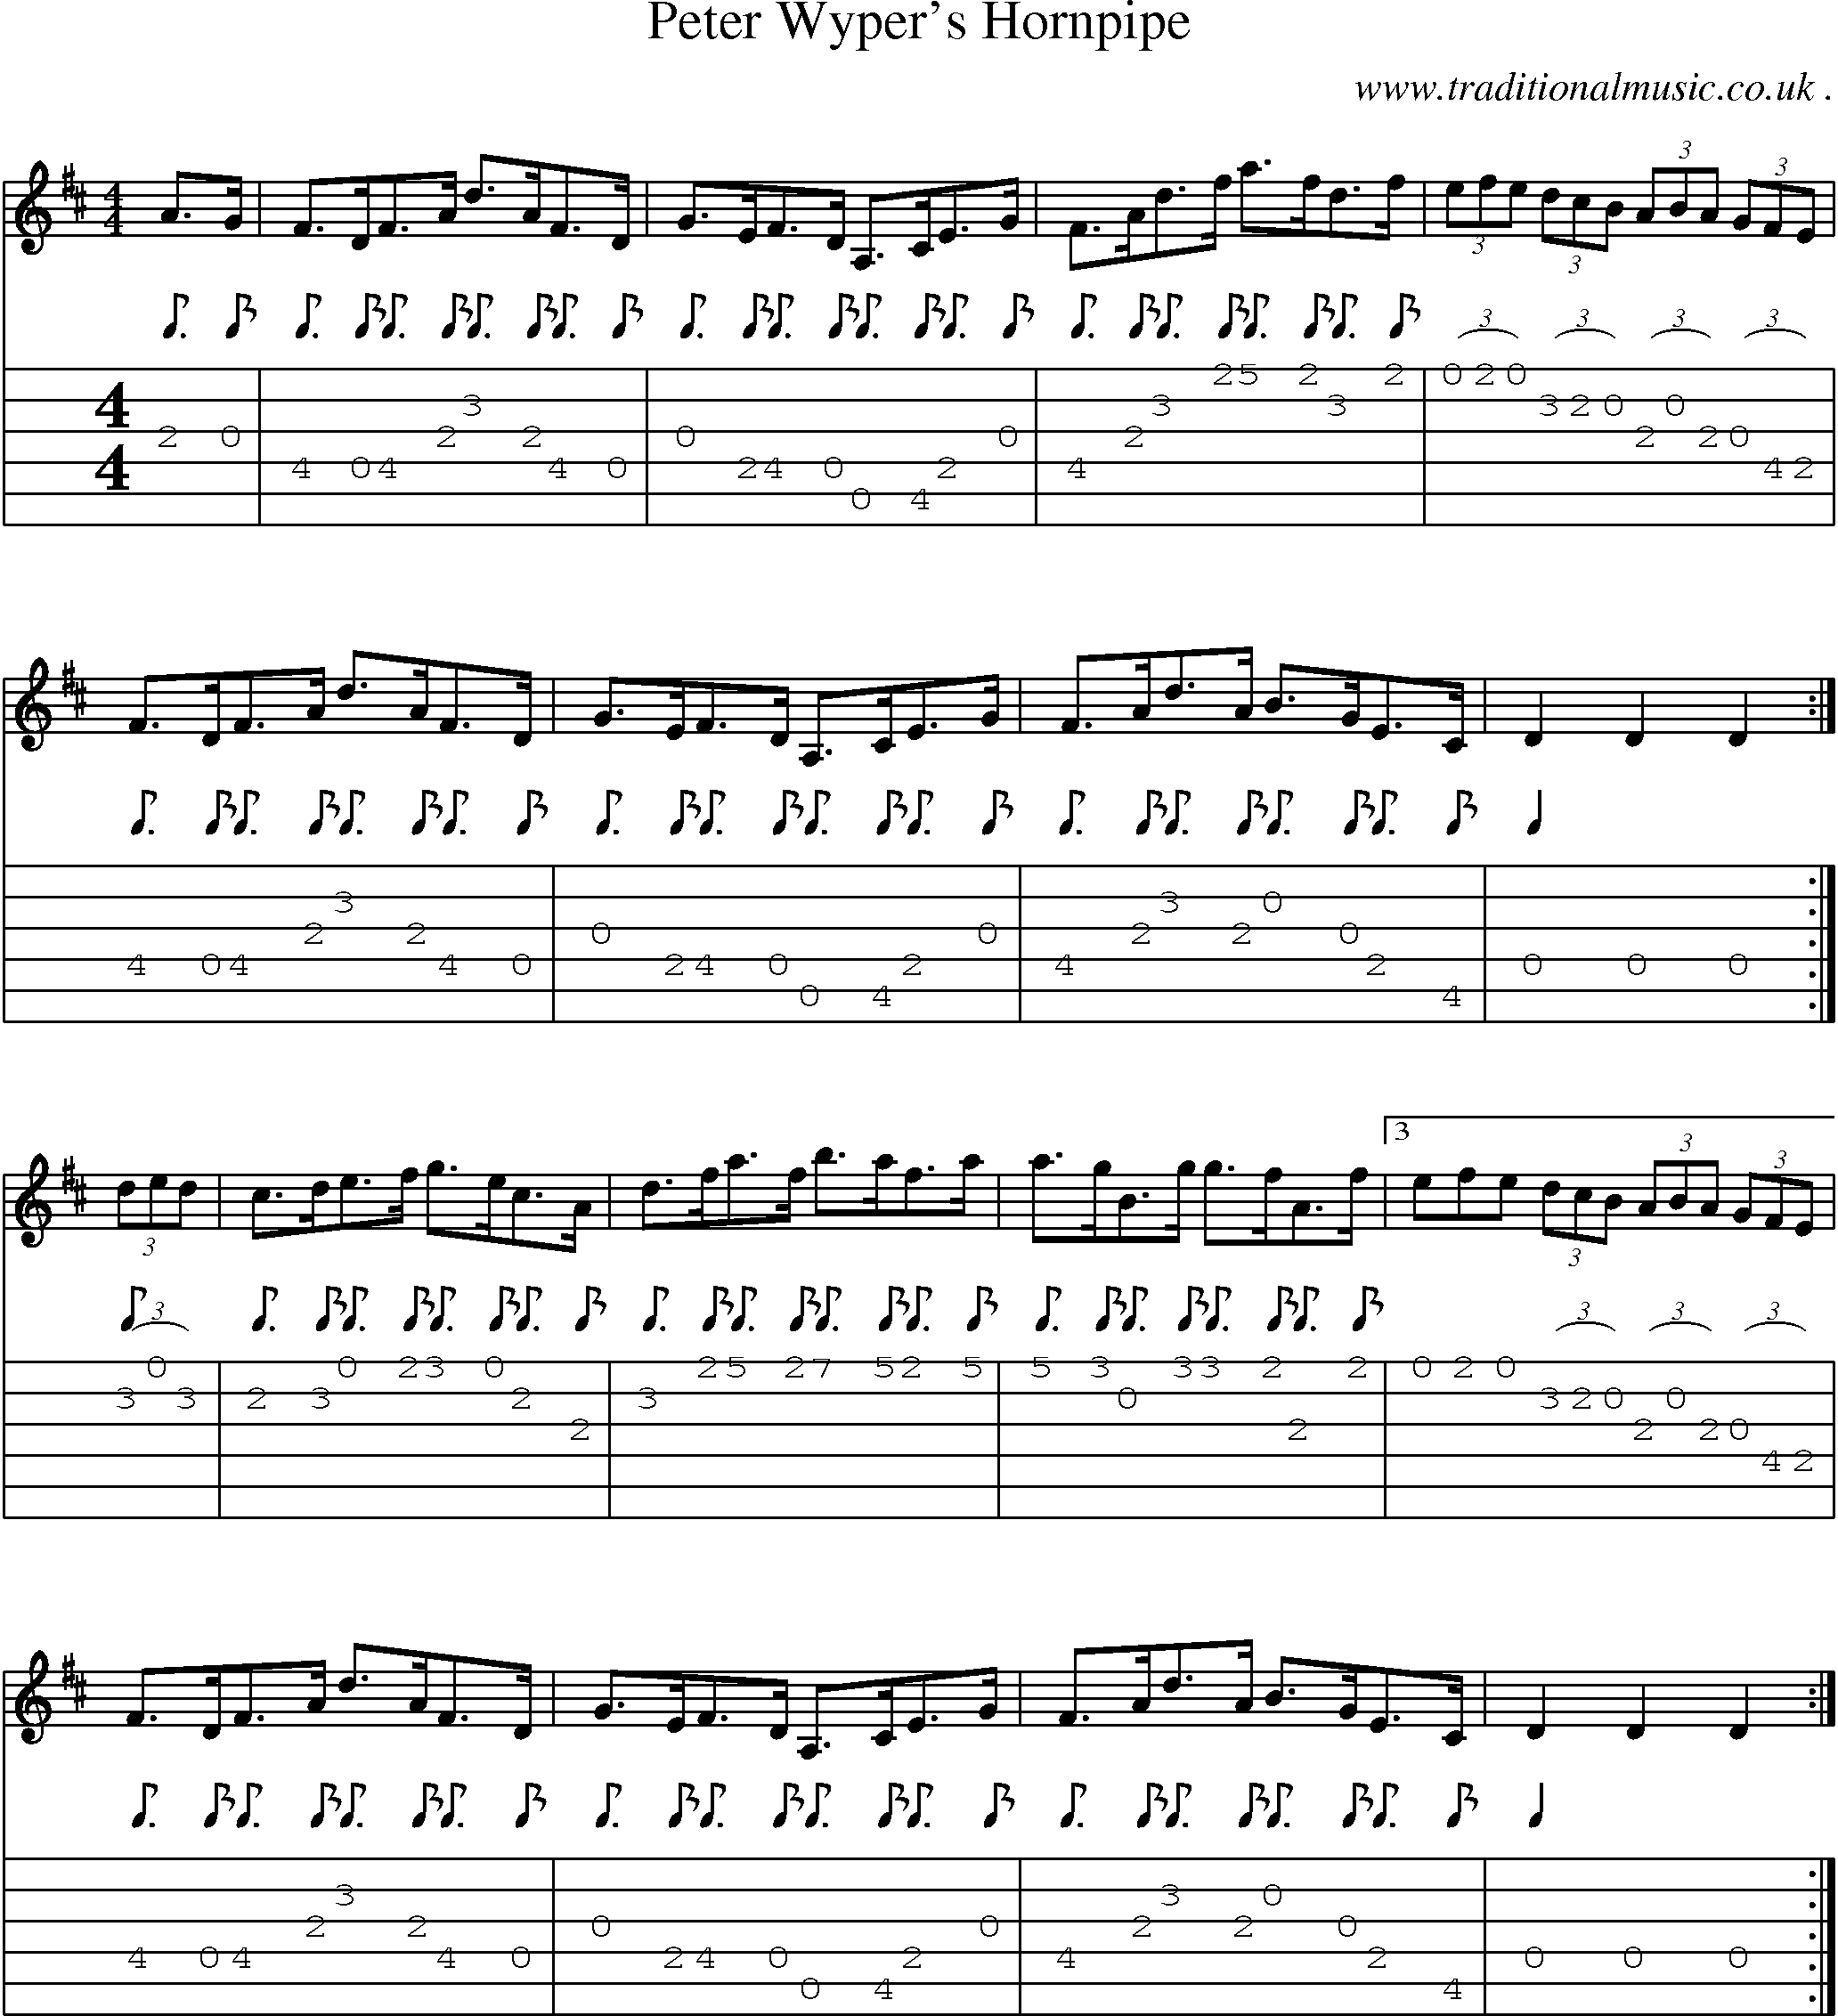 Sheet-music  score, Chords and Guitar Tabs for Peter Wypers Hornpipe